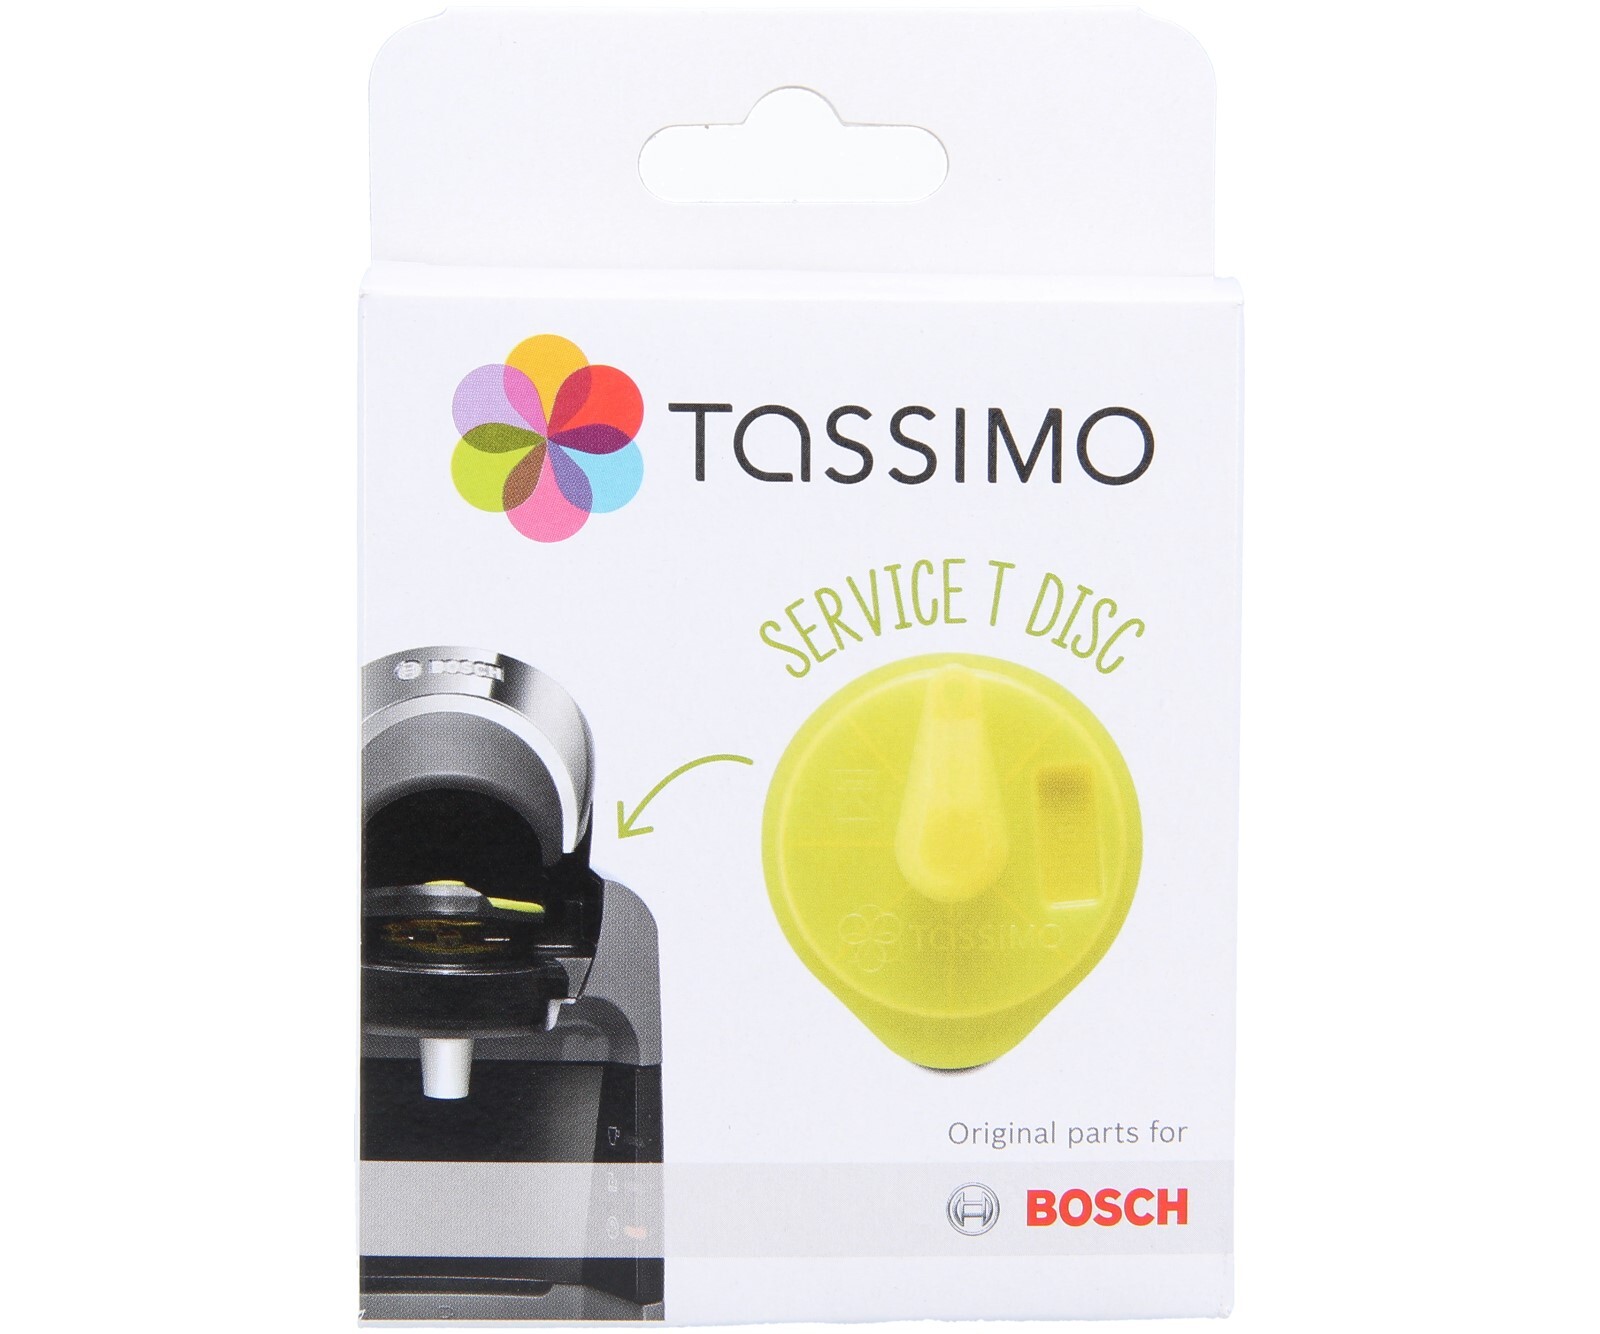 Genuine Bosch T Disc For Tassimo T55 Filter Coffee Machine Service Disk  00632396